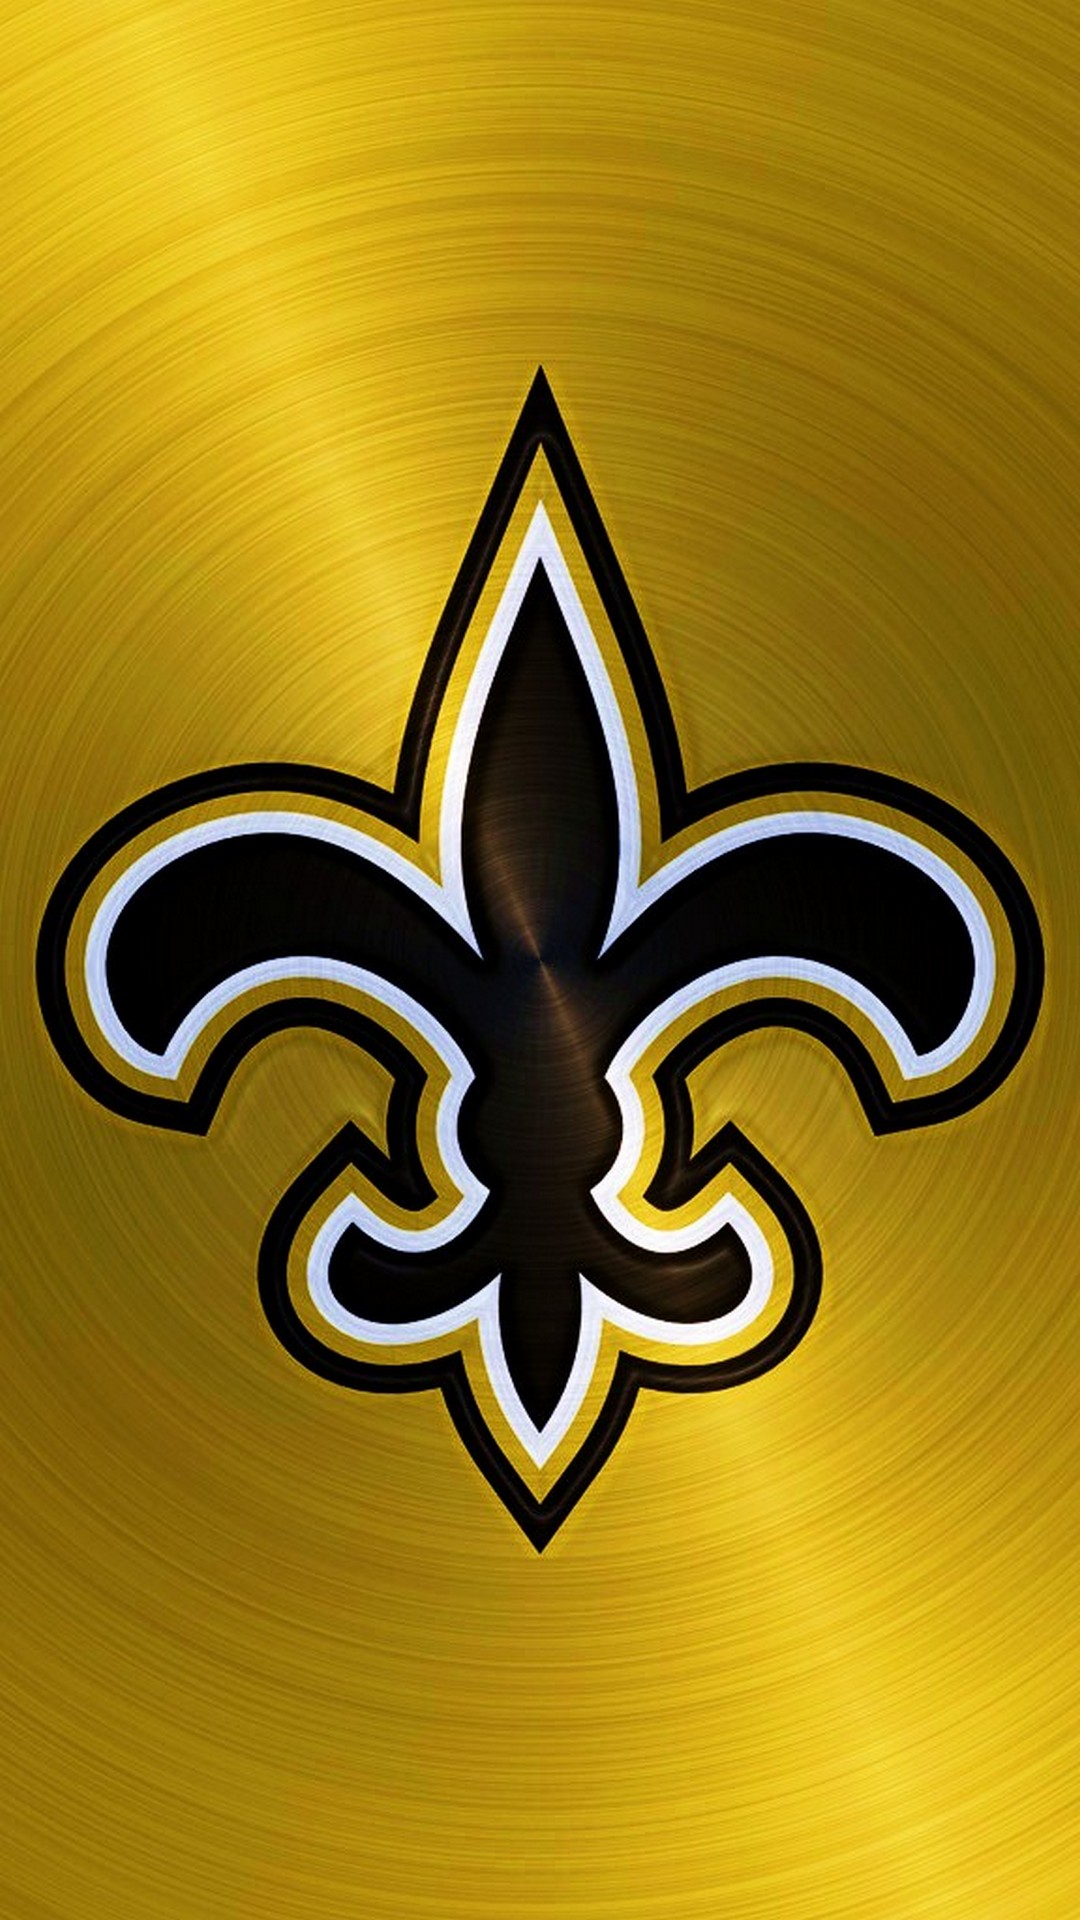 Screensaver iPhone New Orleans Saints With high-resolution 1080X1920 pixel. Donwload and set as wallpaper for your iPhone X, iPhone XS home screen backgrounds, XS Max, XR, iPhone8 lock screen wallpaper, iPhone 7, 6, SE, and other mobile devices